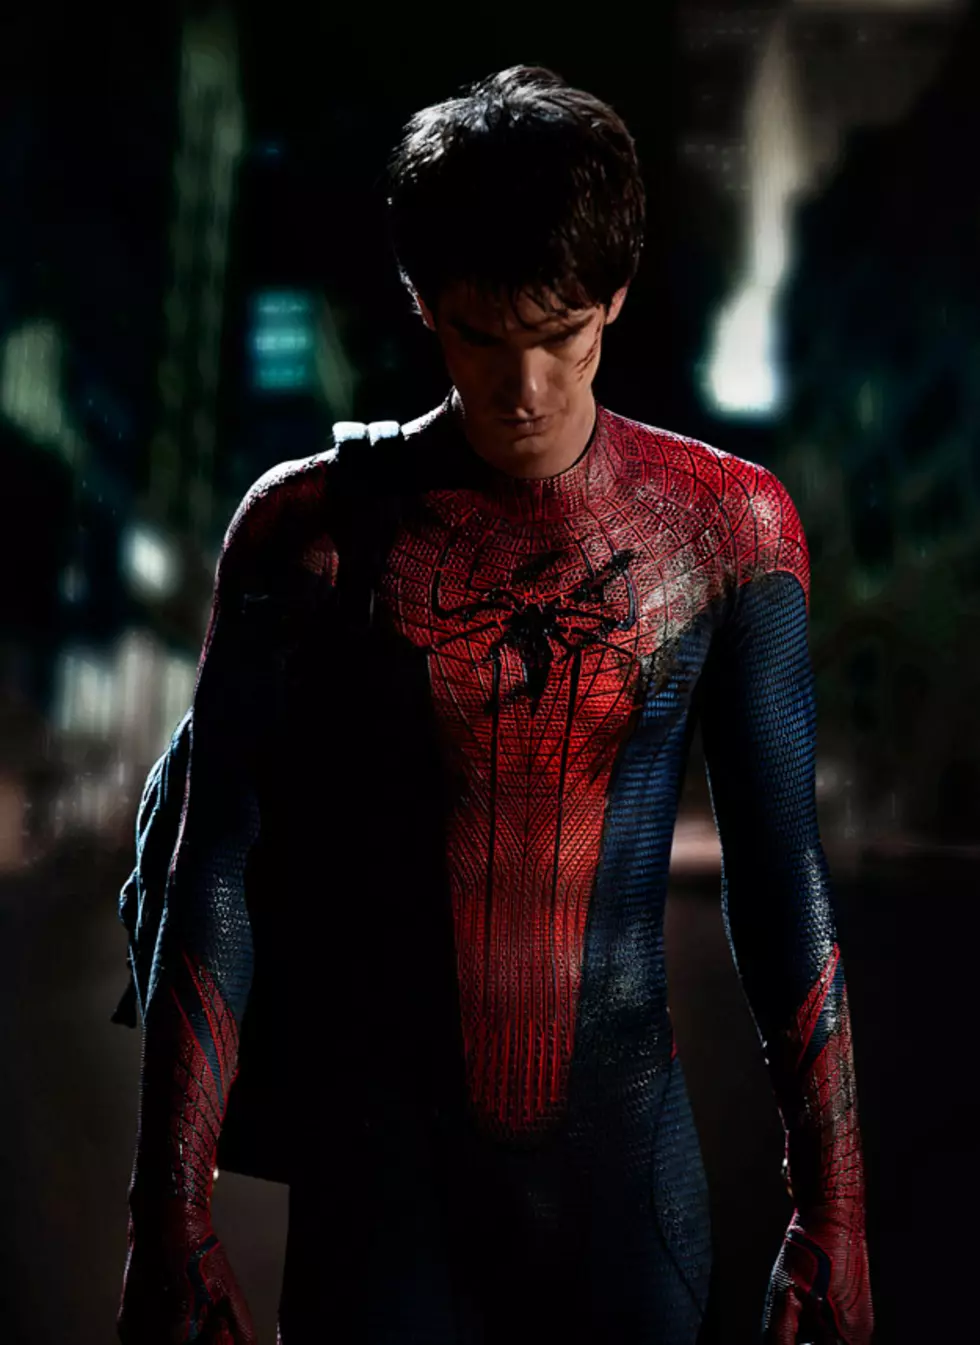 The Leaked “The Amazing Spiderman” Trailer! [Video]